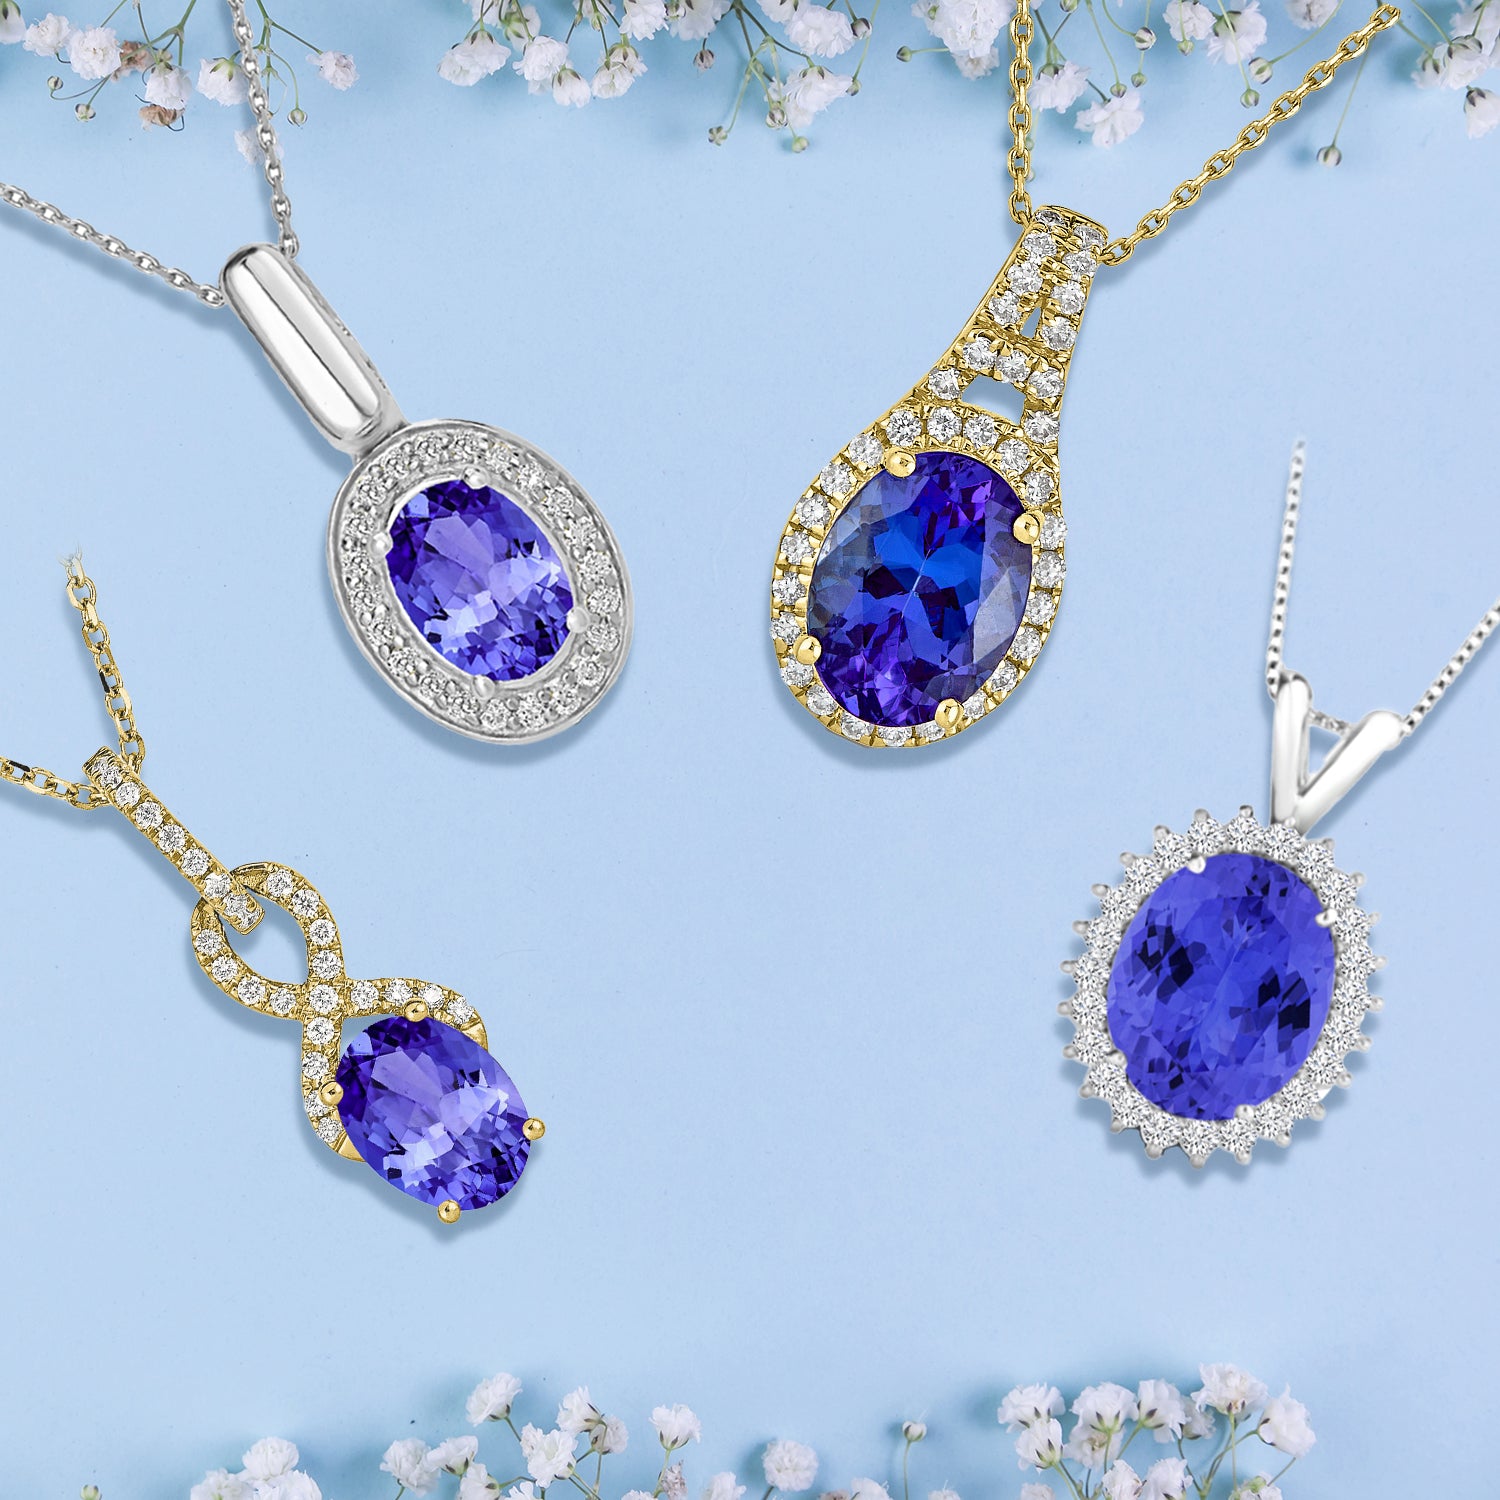 4 Oval tanzanite & diamond pendants under $2500 that are to die for